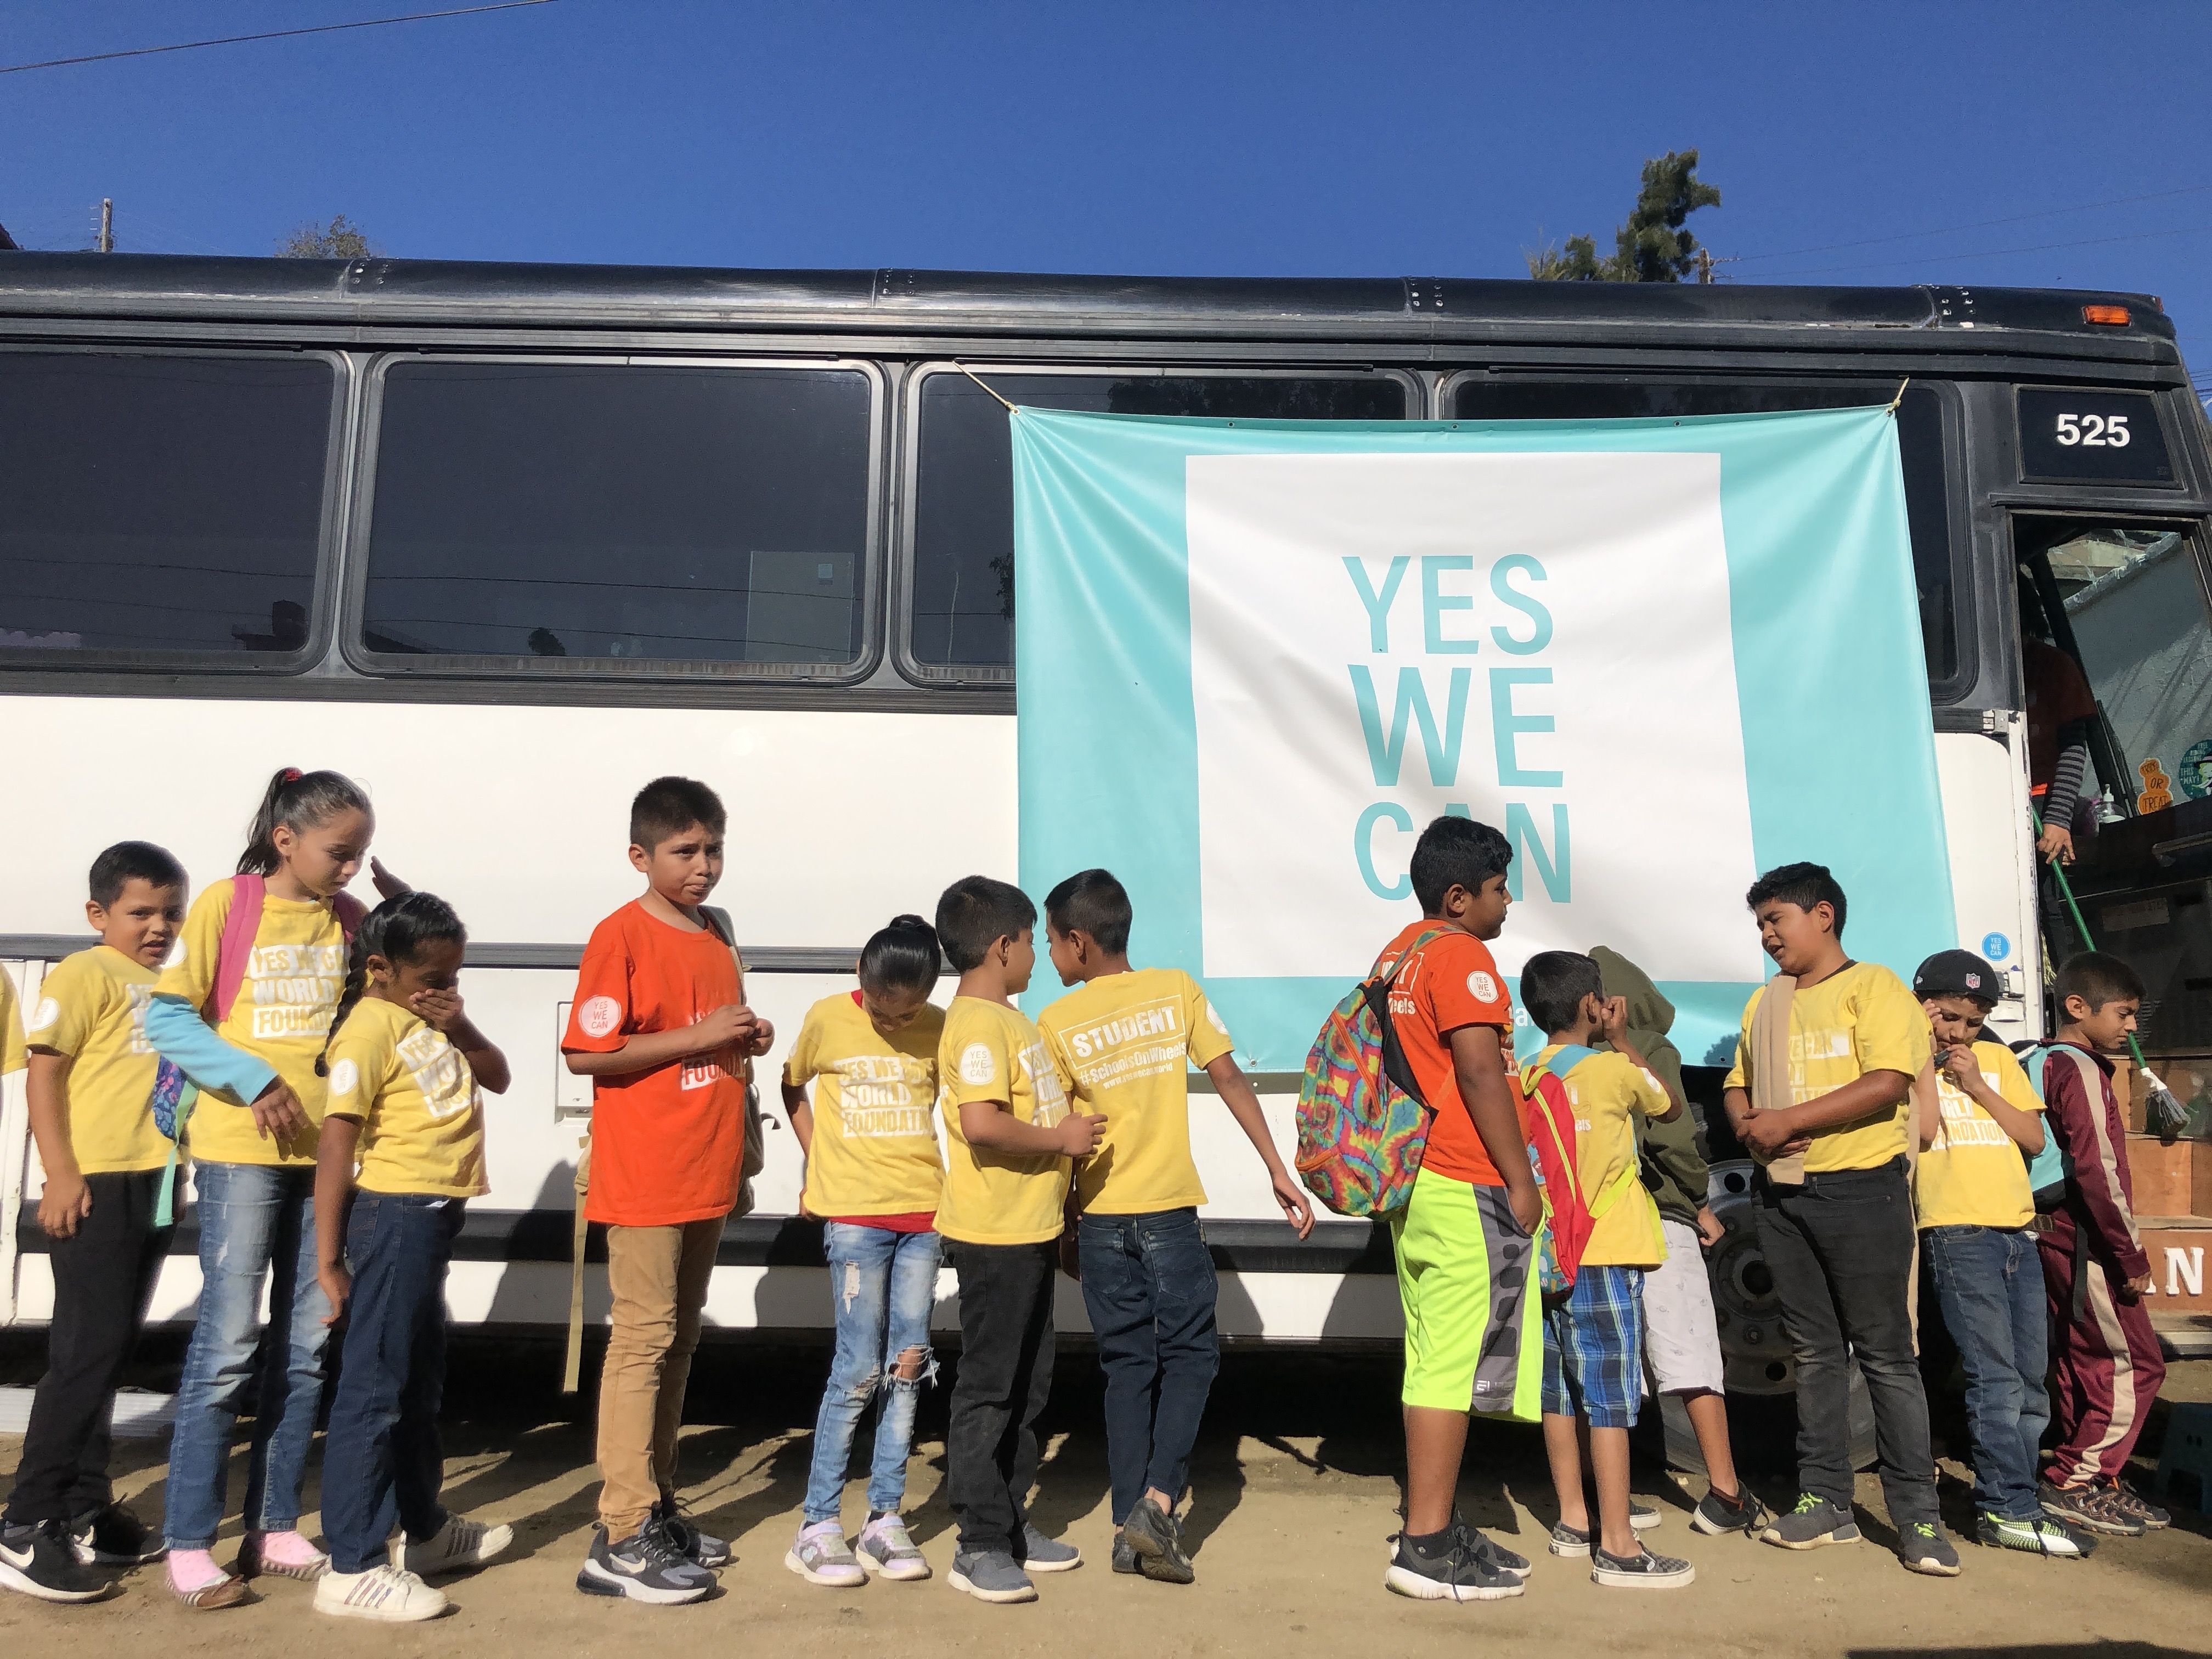 Students in Tijuana prepare for a day of learning aboard the Yes We Can World Foundation school bus. Soon, Rebellón hopes to open a new school for migrant kids in Juárez, across the border from El Paso, Texas. Image by Jaime Joyce. Mexico, 2019.